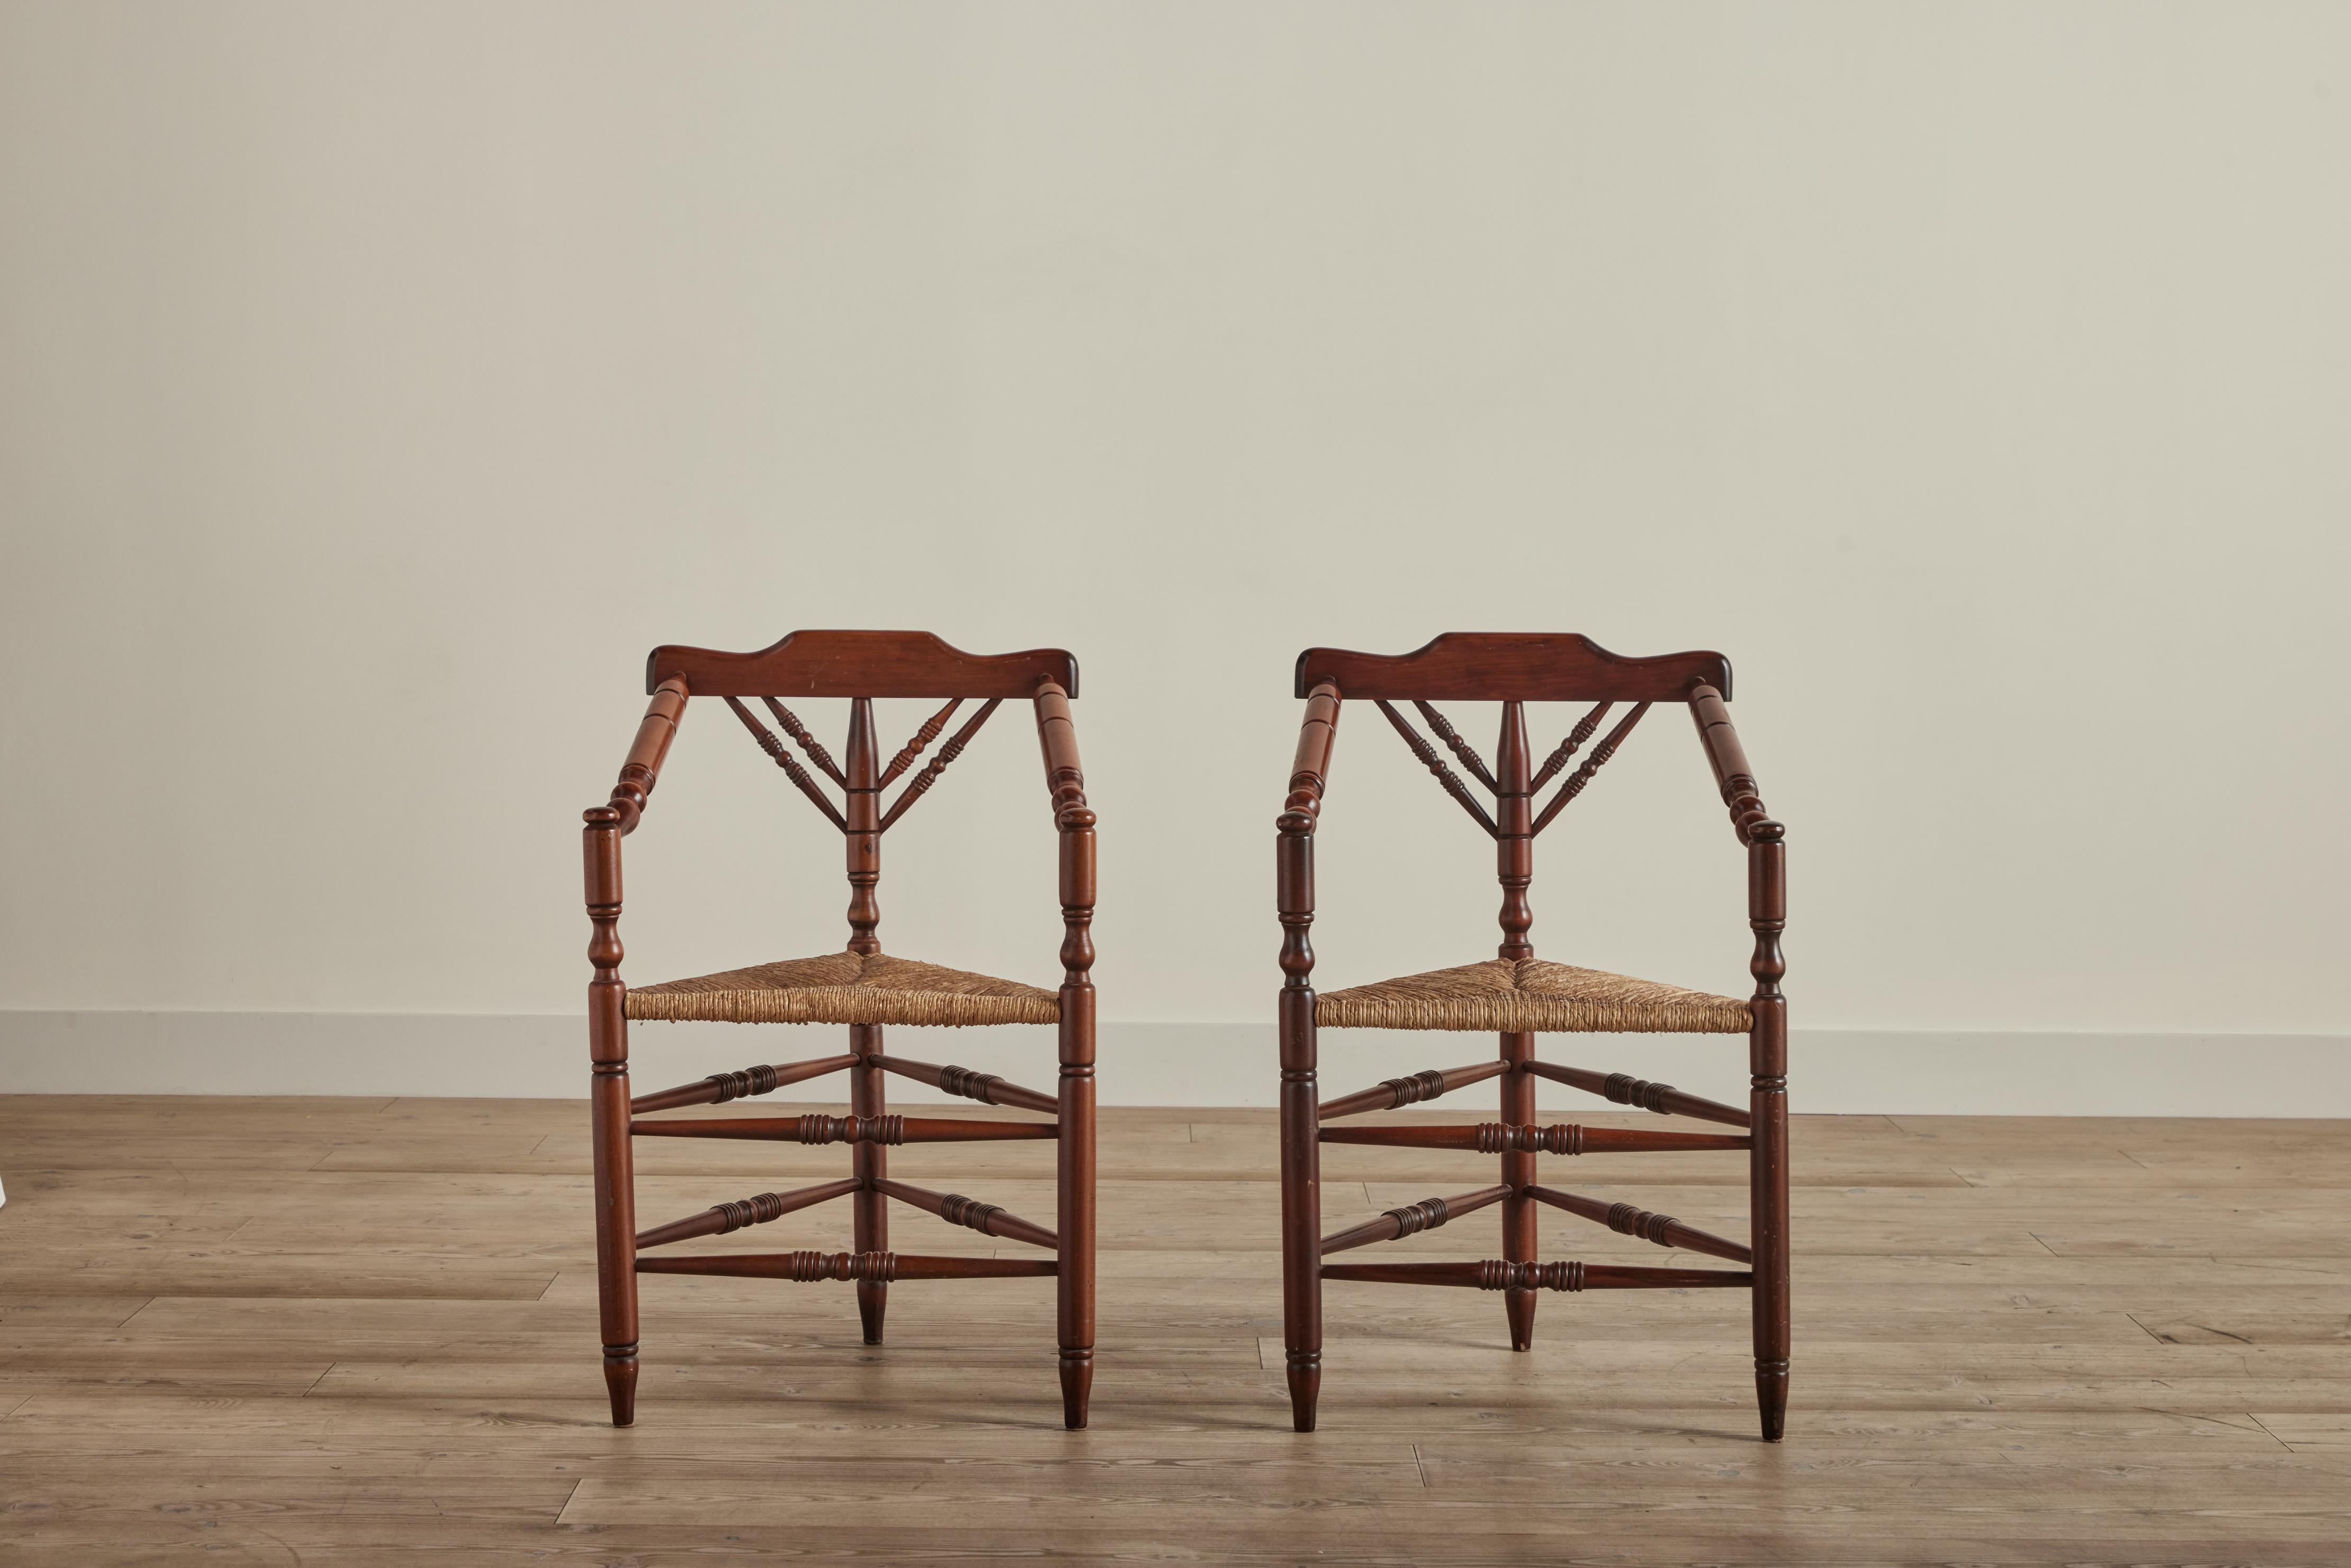 Pair of Dutch Turner’s chairs with rush seats circa 1960. This style of chair is known as a “Turner’s chair” because the chair frame parts, including the seat are turned on a pole lathe by a wood turner. Some wear on wood and rush that is consistent